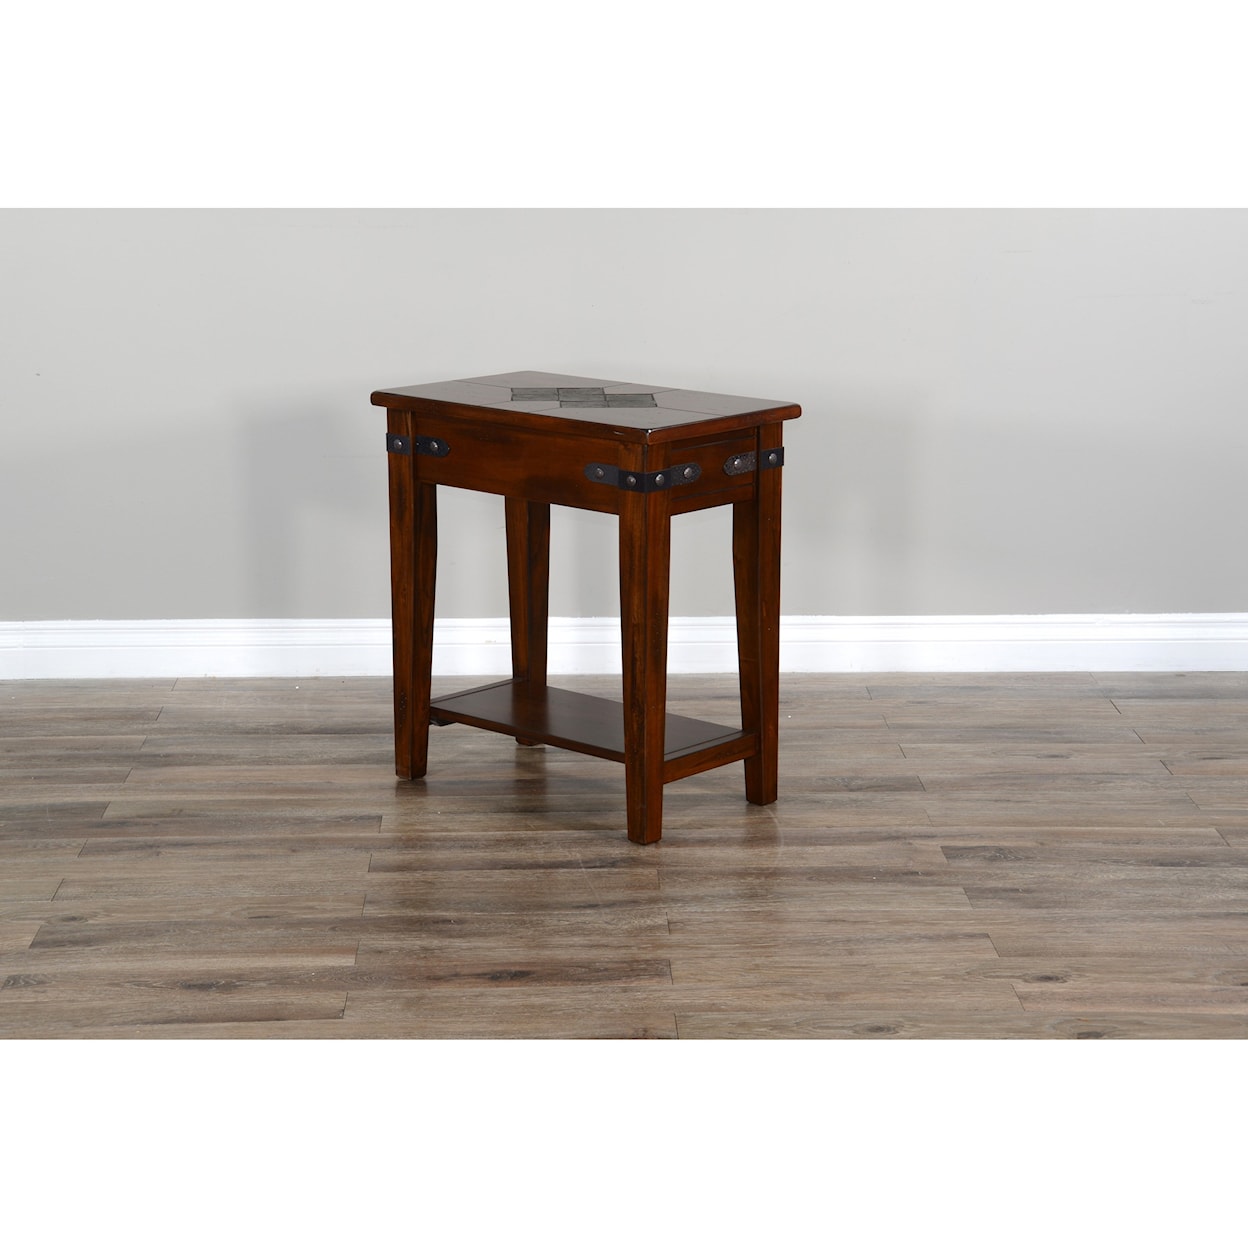 Sunny Designs 12136 Chair Side Table